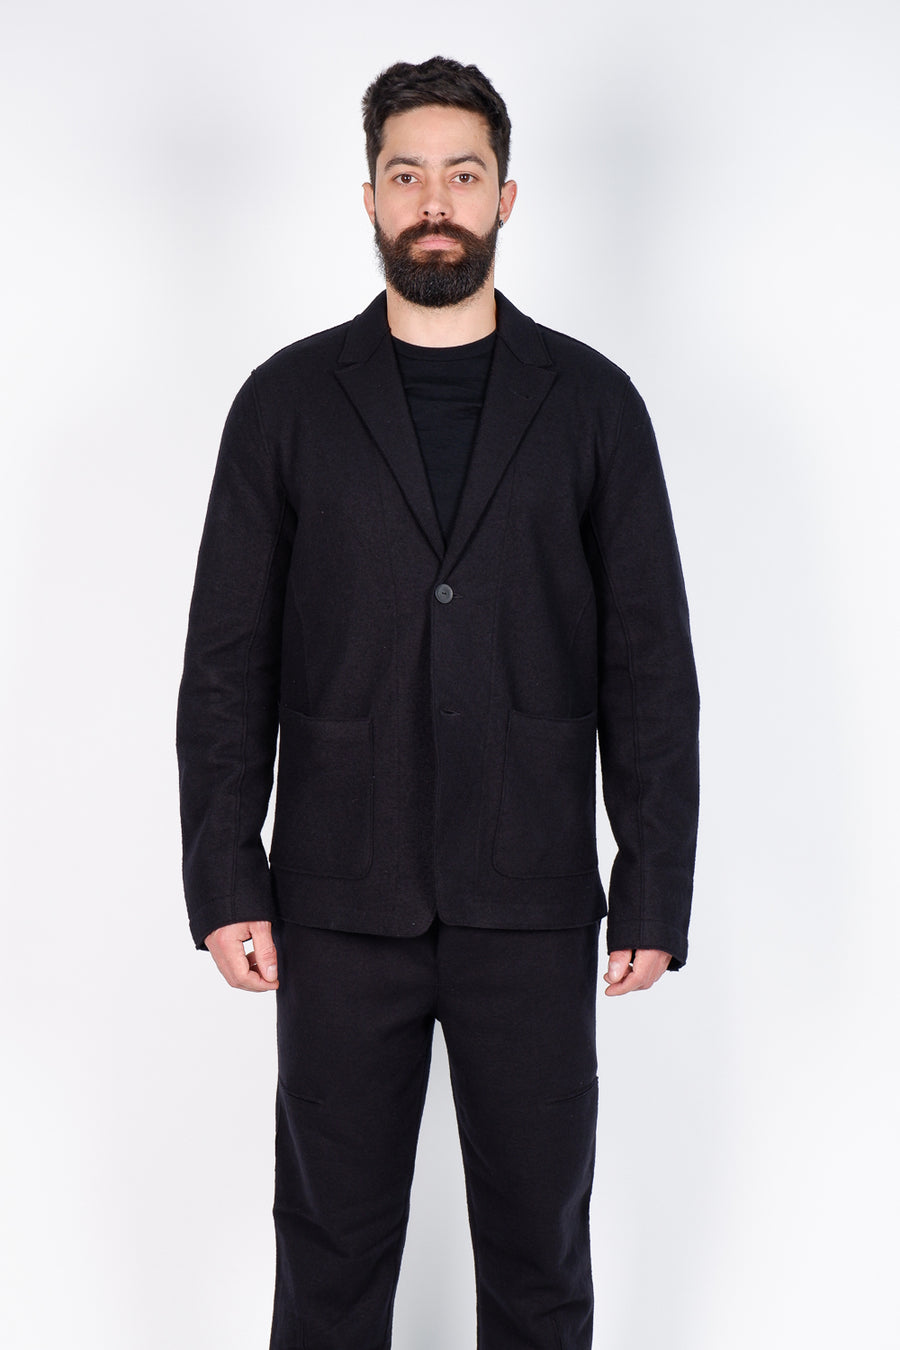 Buy the Transit Raw Cut Wool Blazer Black at Intro. Spend £50 for free UK delivery. Official stockists. We ship worldwide.